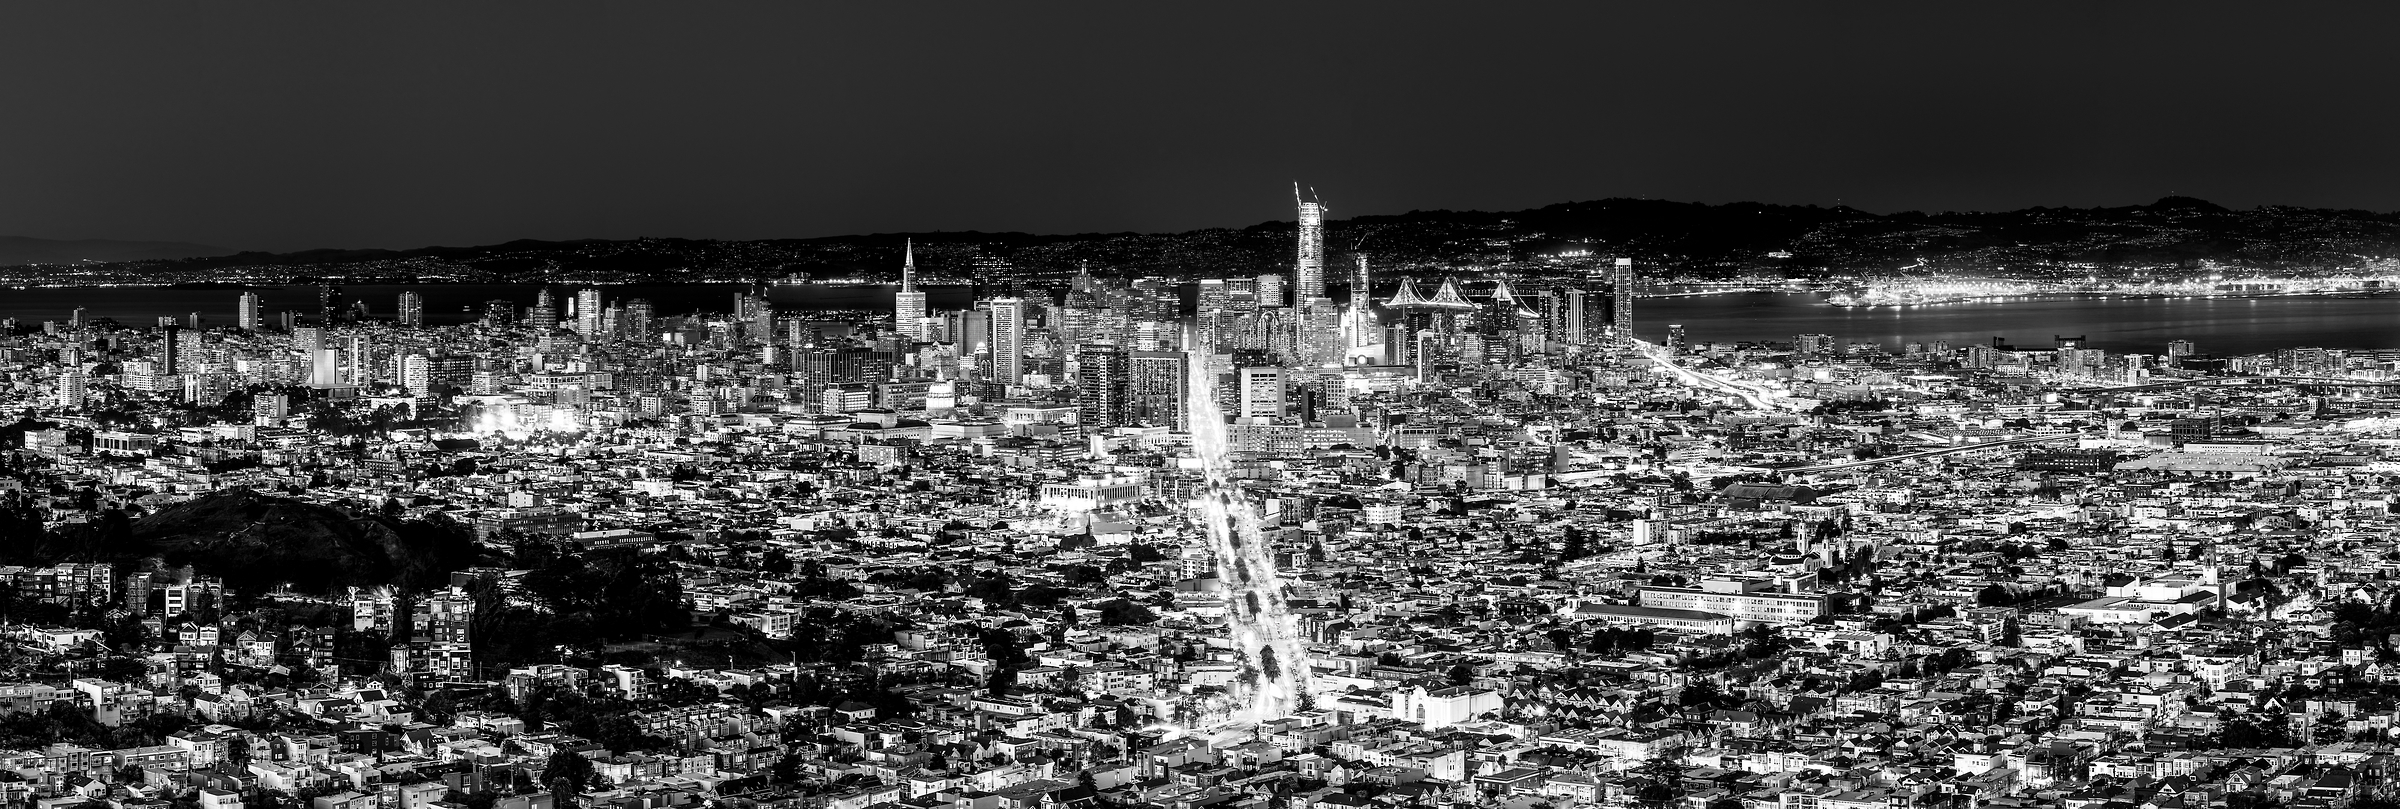 363 megapixels! A very high resolution, large-format VAST photo of the Downtown San Francisco city skyline at sunset dusk; fine art black and white cityscape photograph created by Justin Katz in California.